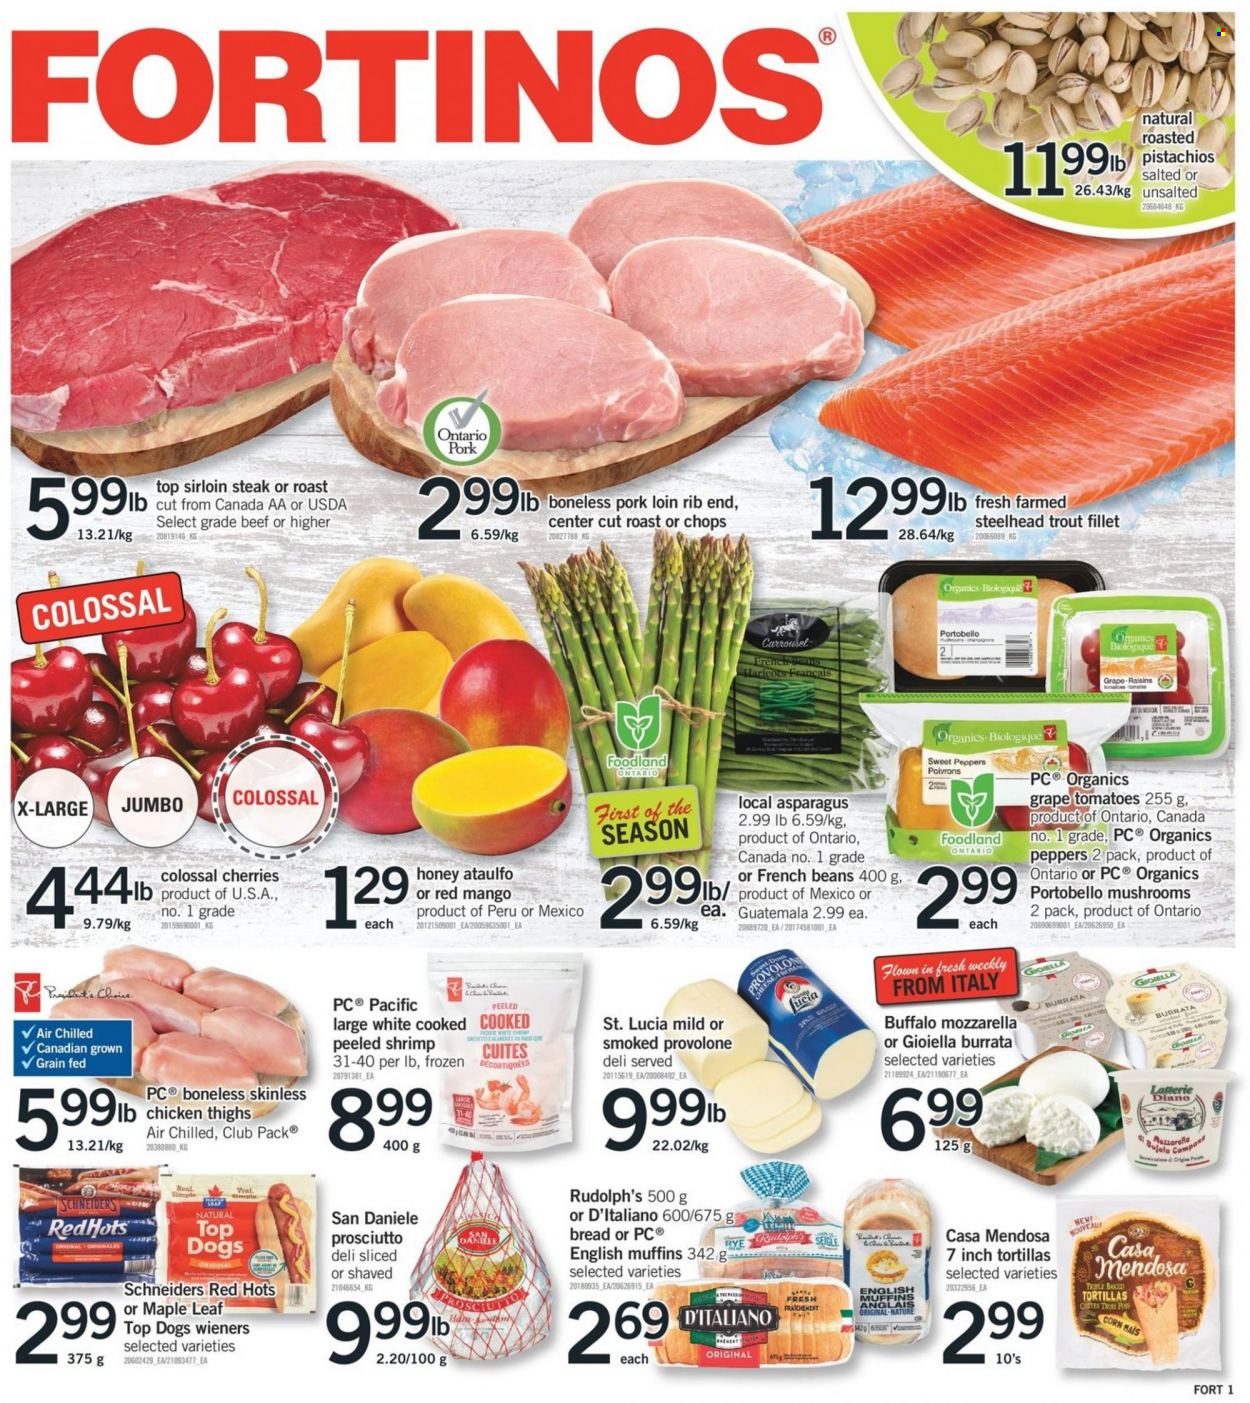 thumbnail - Fortinos Flyer - May 12, 2022 - May 18, 2022 - Sales products - portobello mushrooms, mushrooms, bread, english muffins, tortillas, asparagus, beans, corn, french beans, sweet peppers, tomatoes, peppers, mango, cherries, trout, prosciutto, Provolone, honey, dried fruit, pistachios, chicken thighs, chicken, beef sirloin, sirloin steak, pork loin, pork meat, mozzarella, raisins, steak. Page 1.